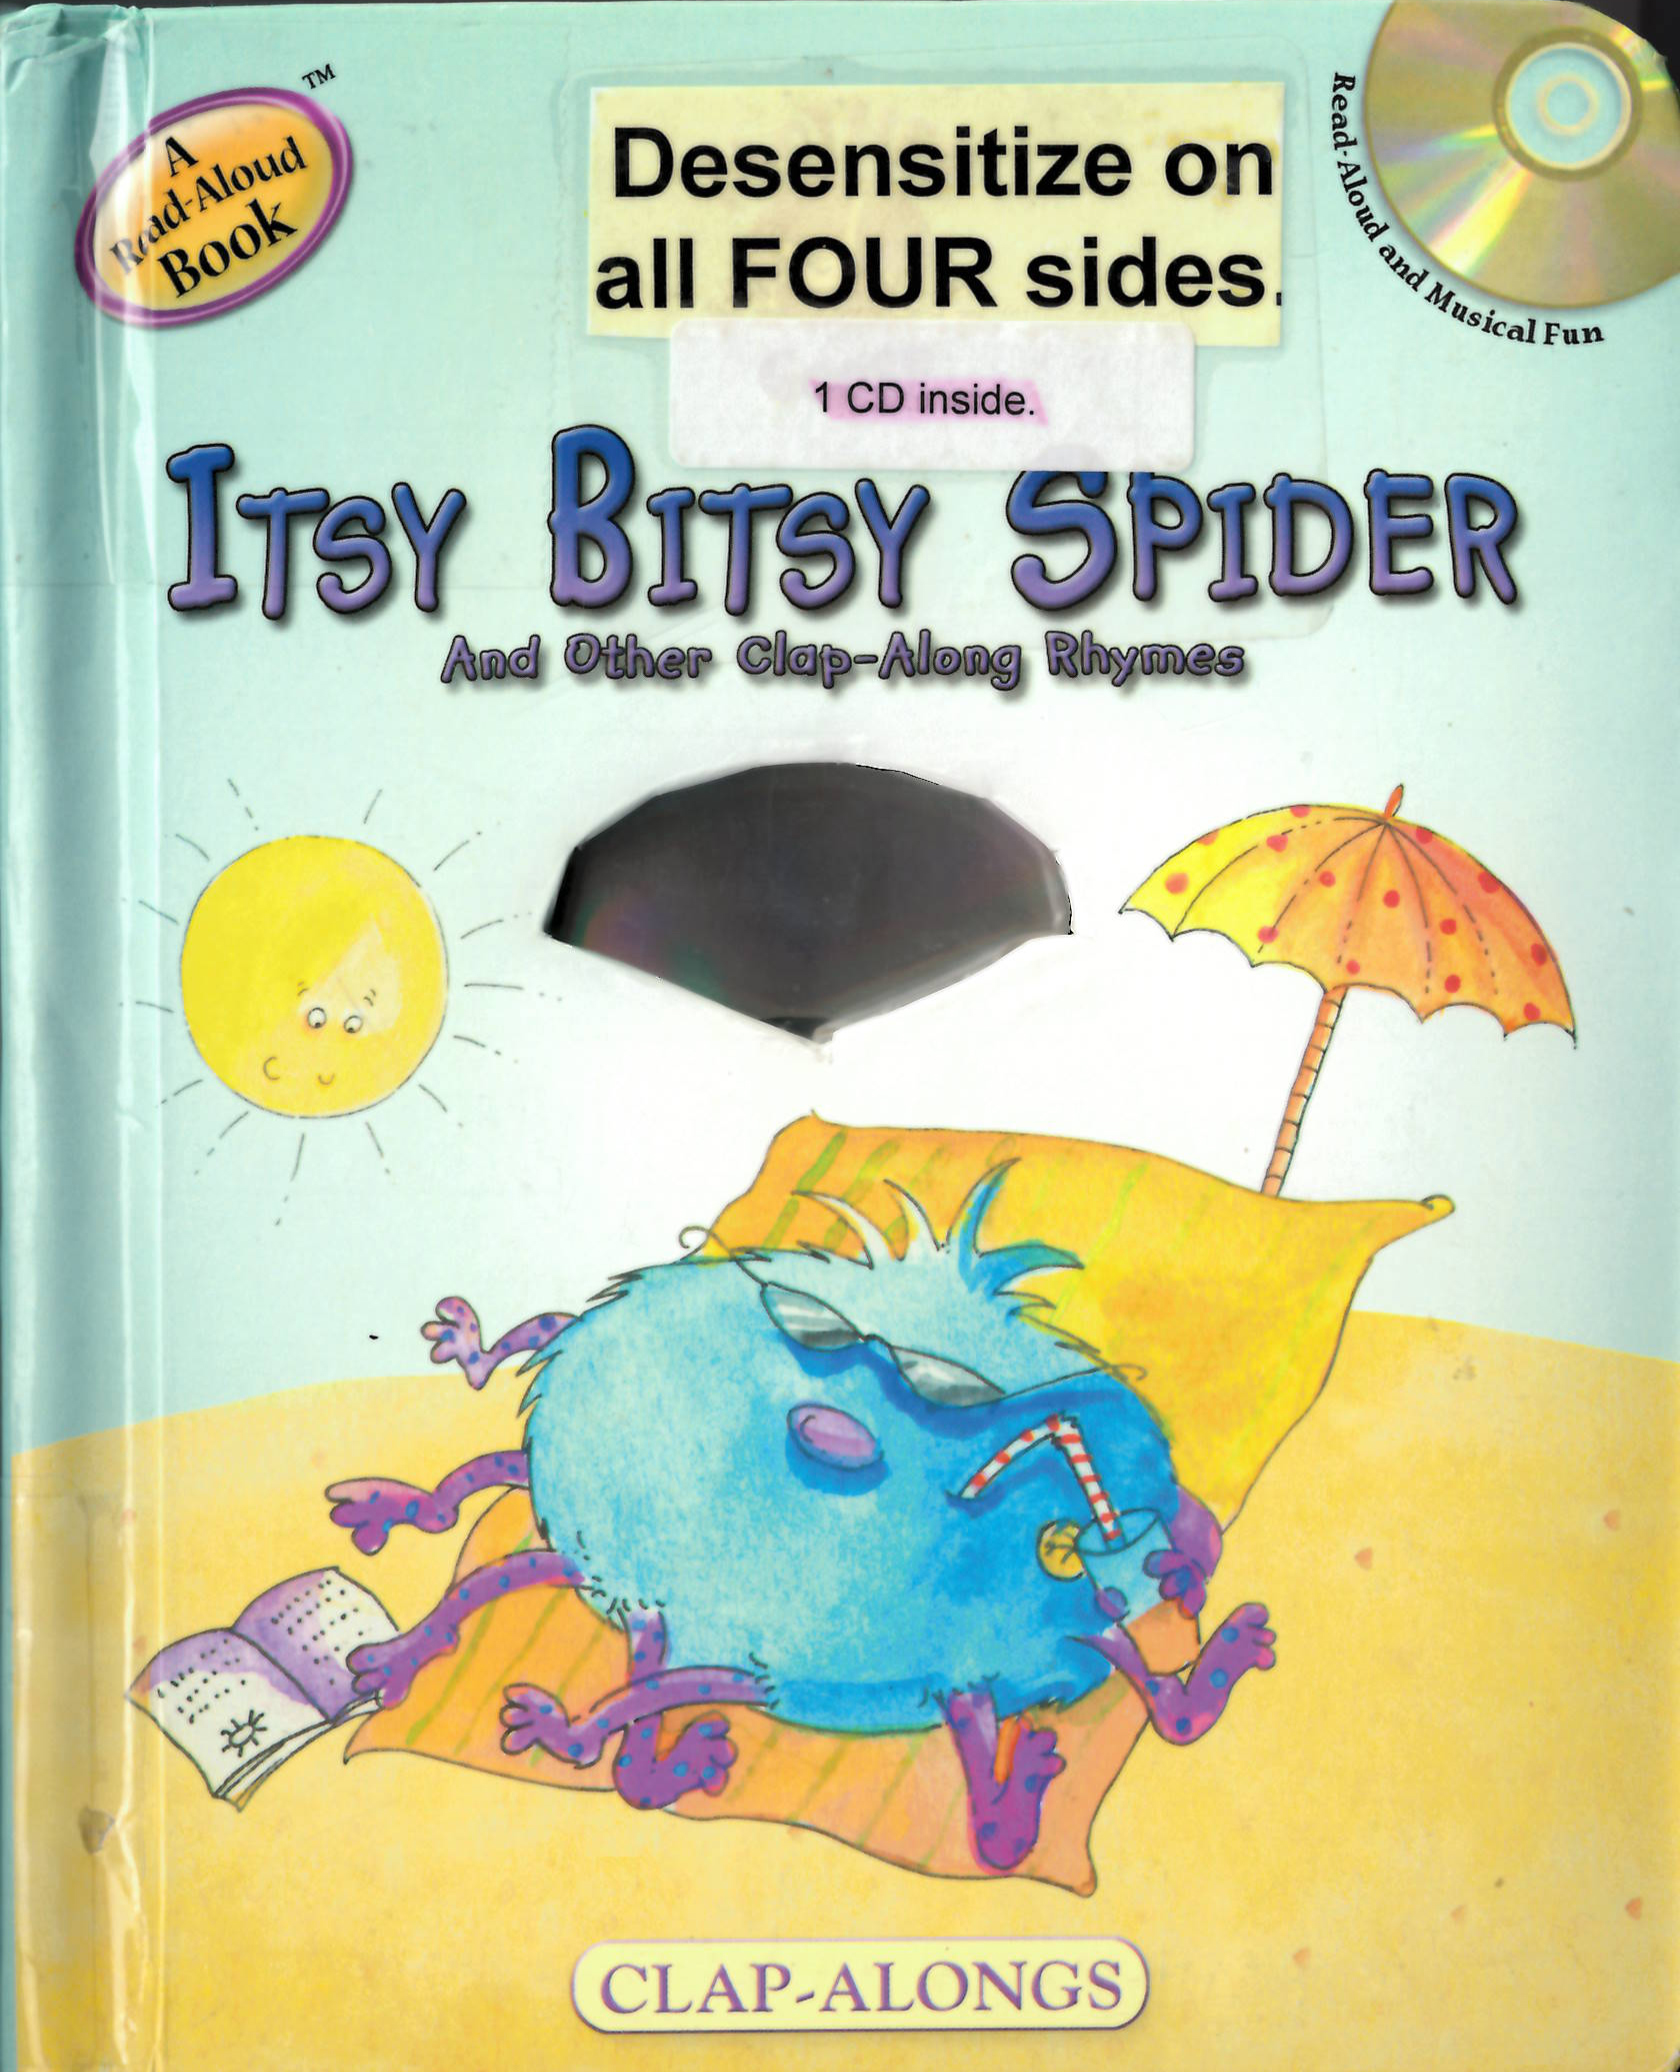 Itsy bitsy spider and other clap-along rhymes